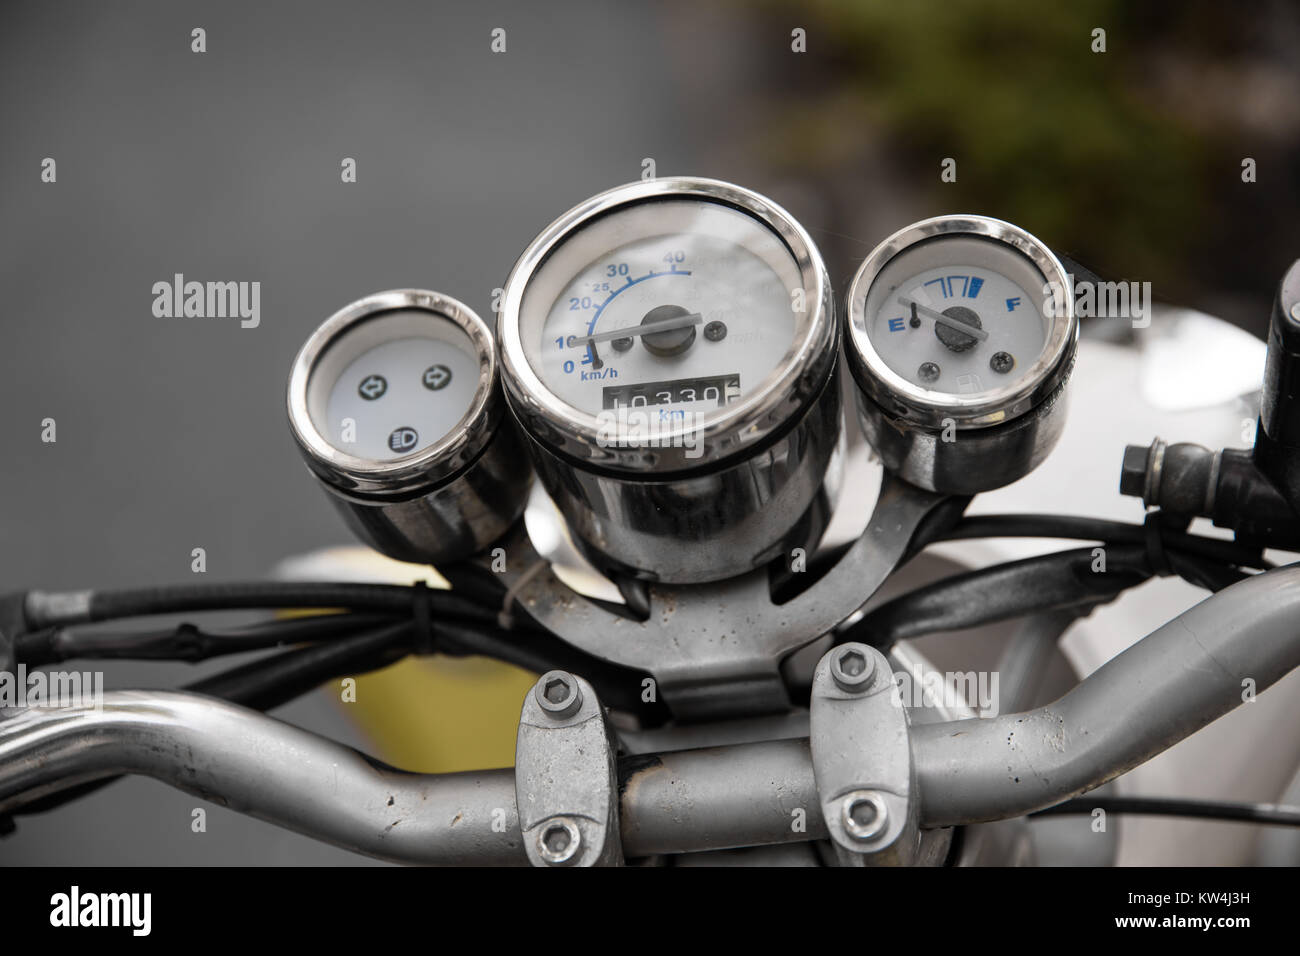 Vintage motorbike. Devices on a steering bracket on the old bike Stock Photo - Alamy